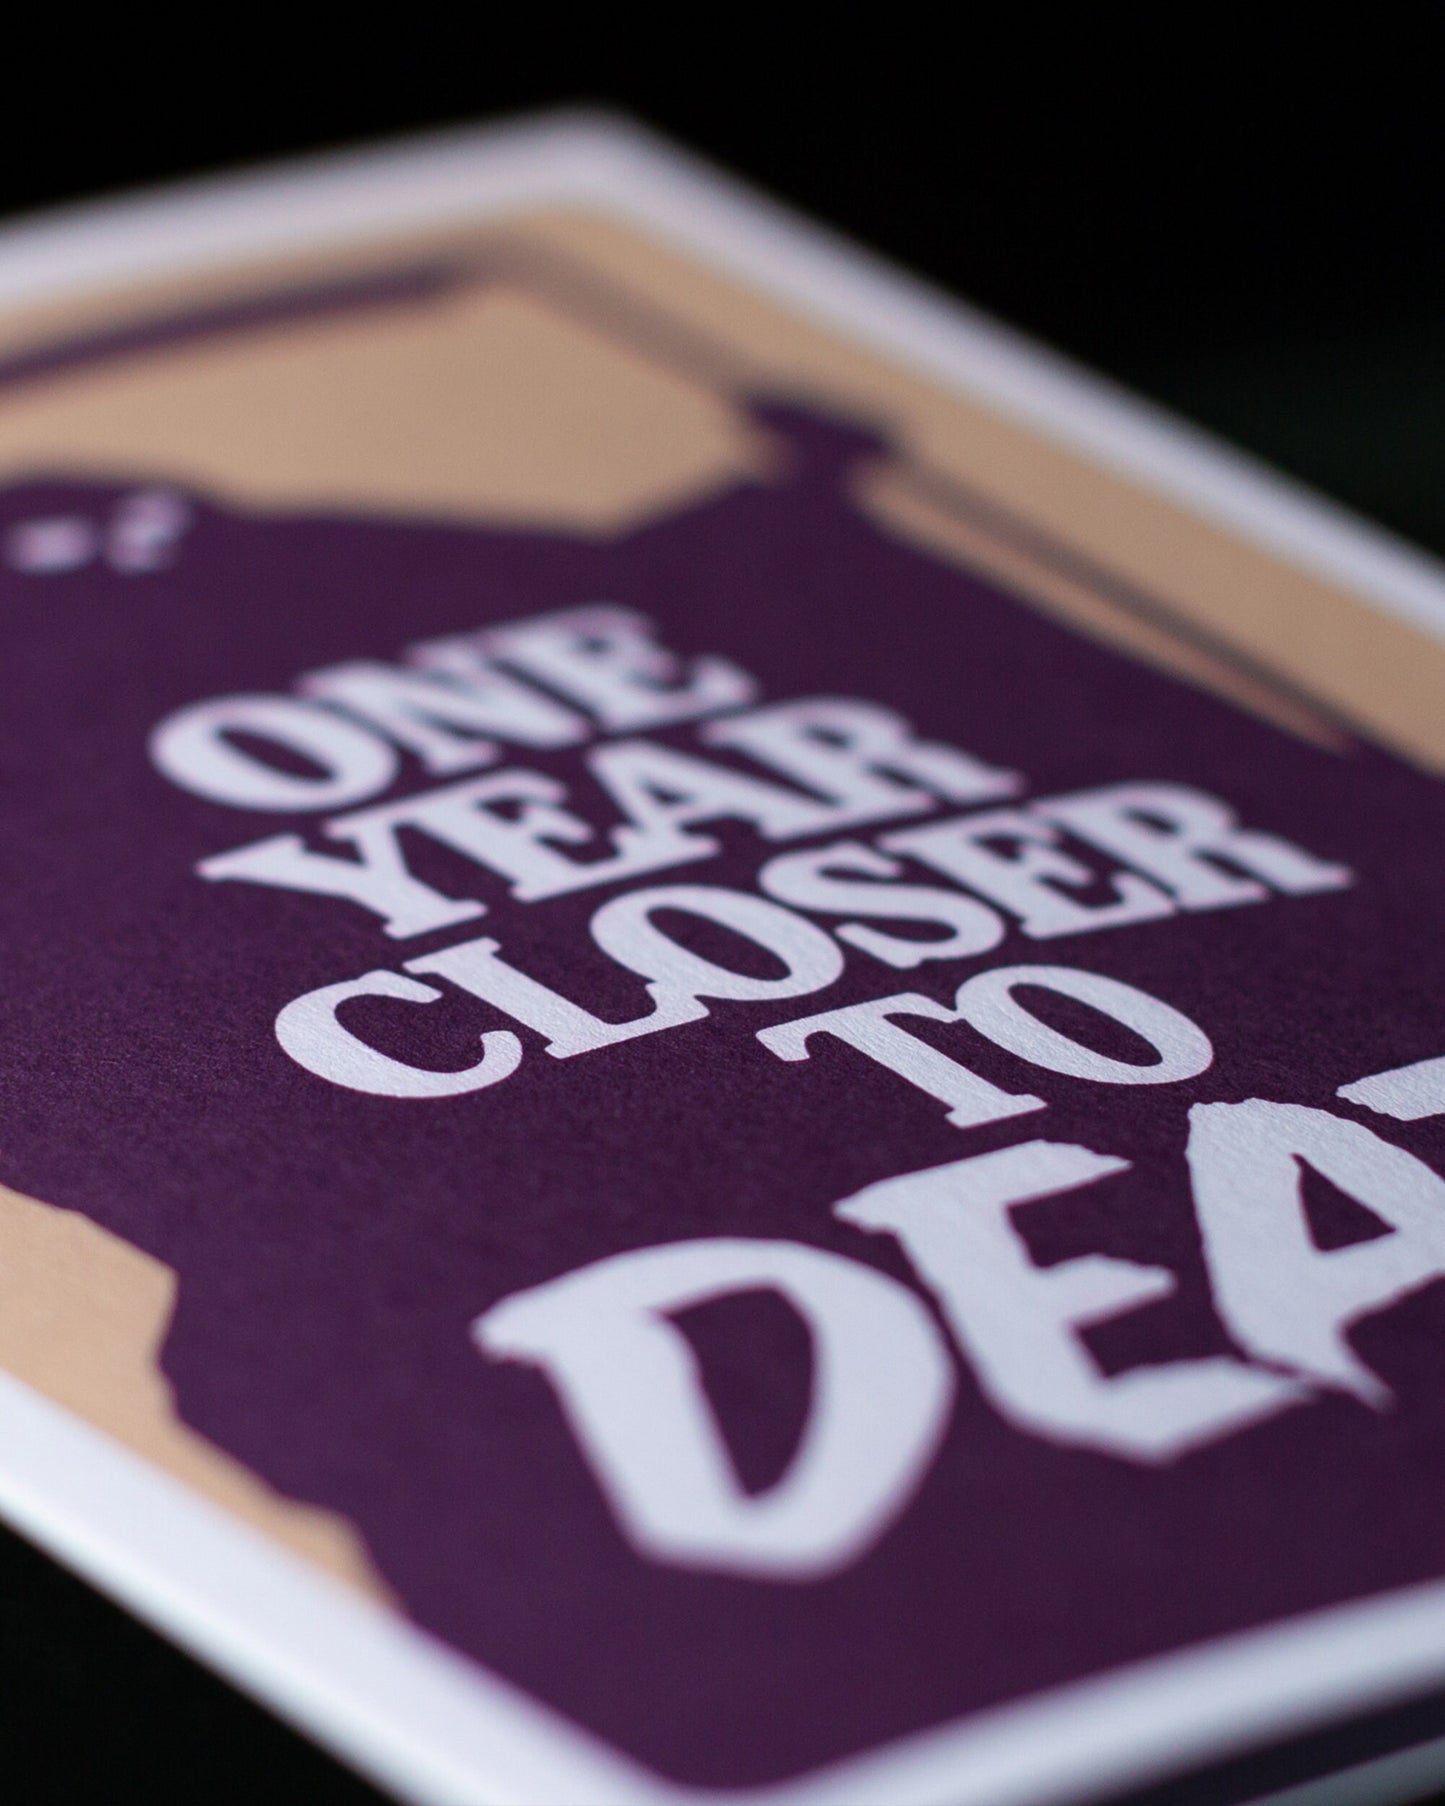 One Year Closer To Death Greeting Card